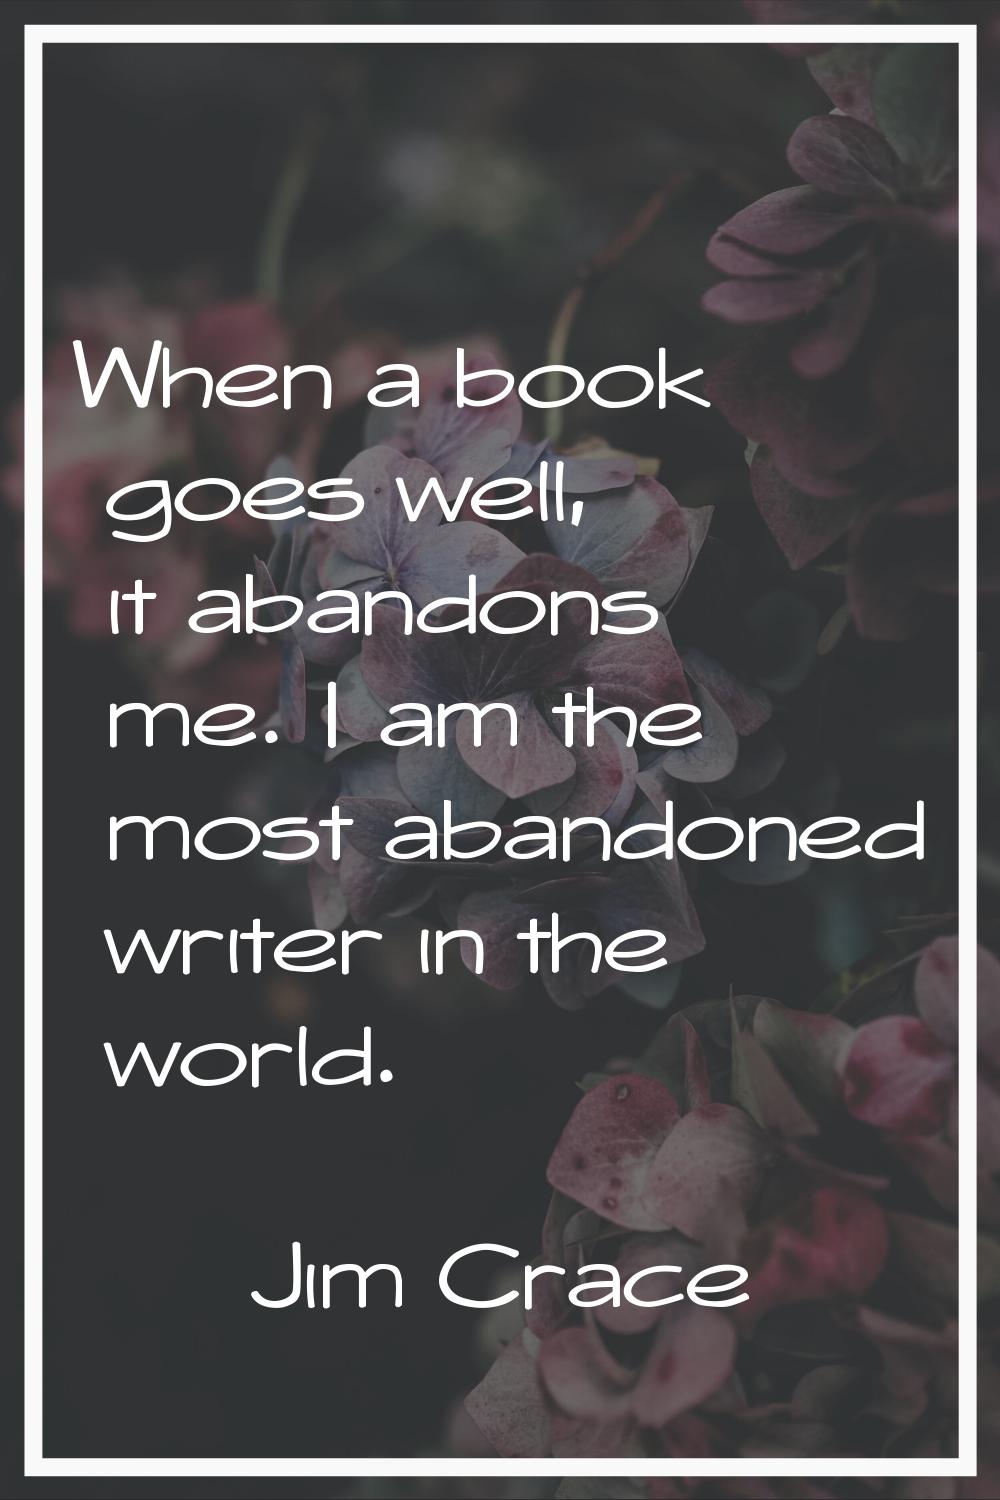 When a book goes well, it abandons me. I am the most abandoned writer in the world.